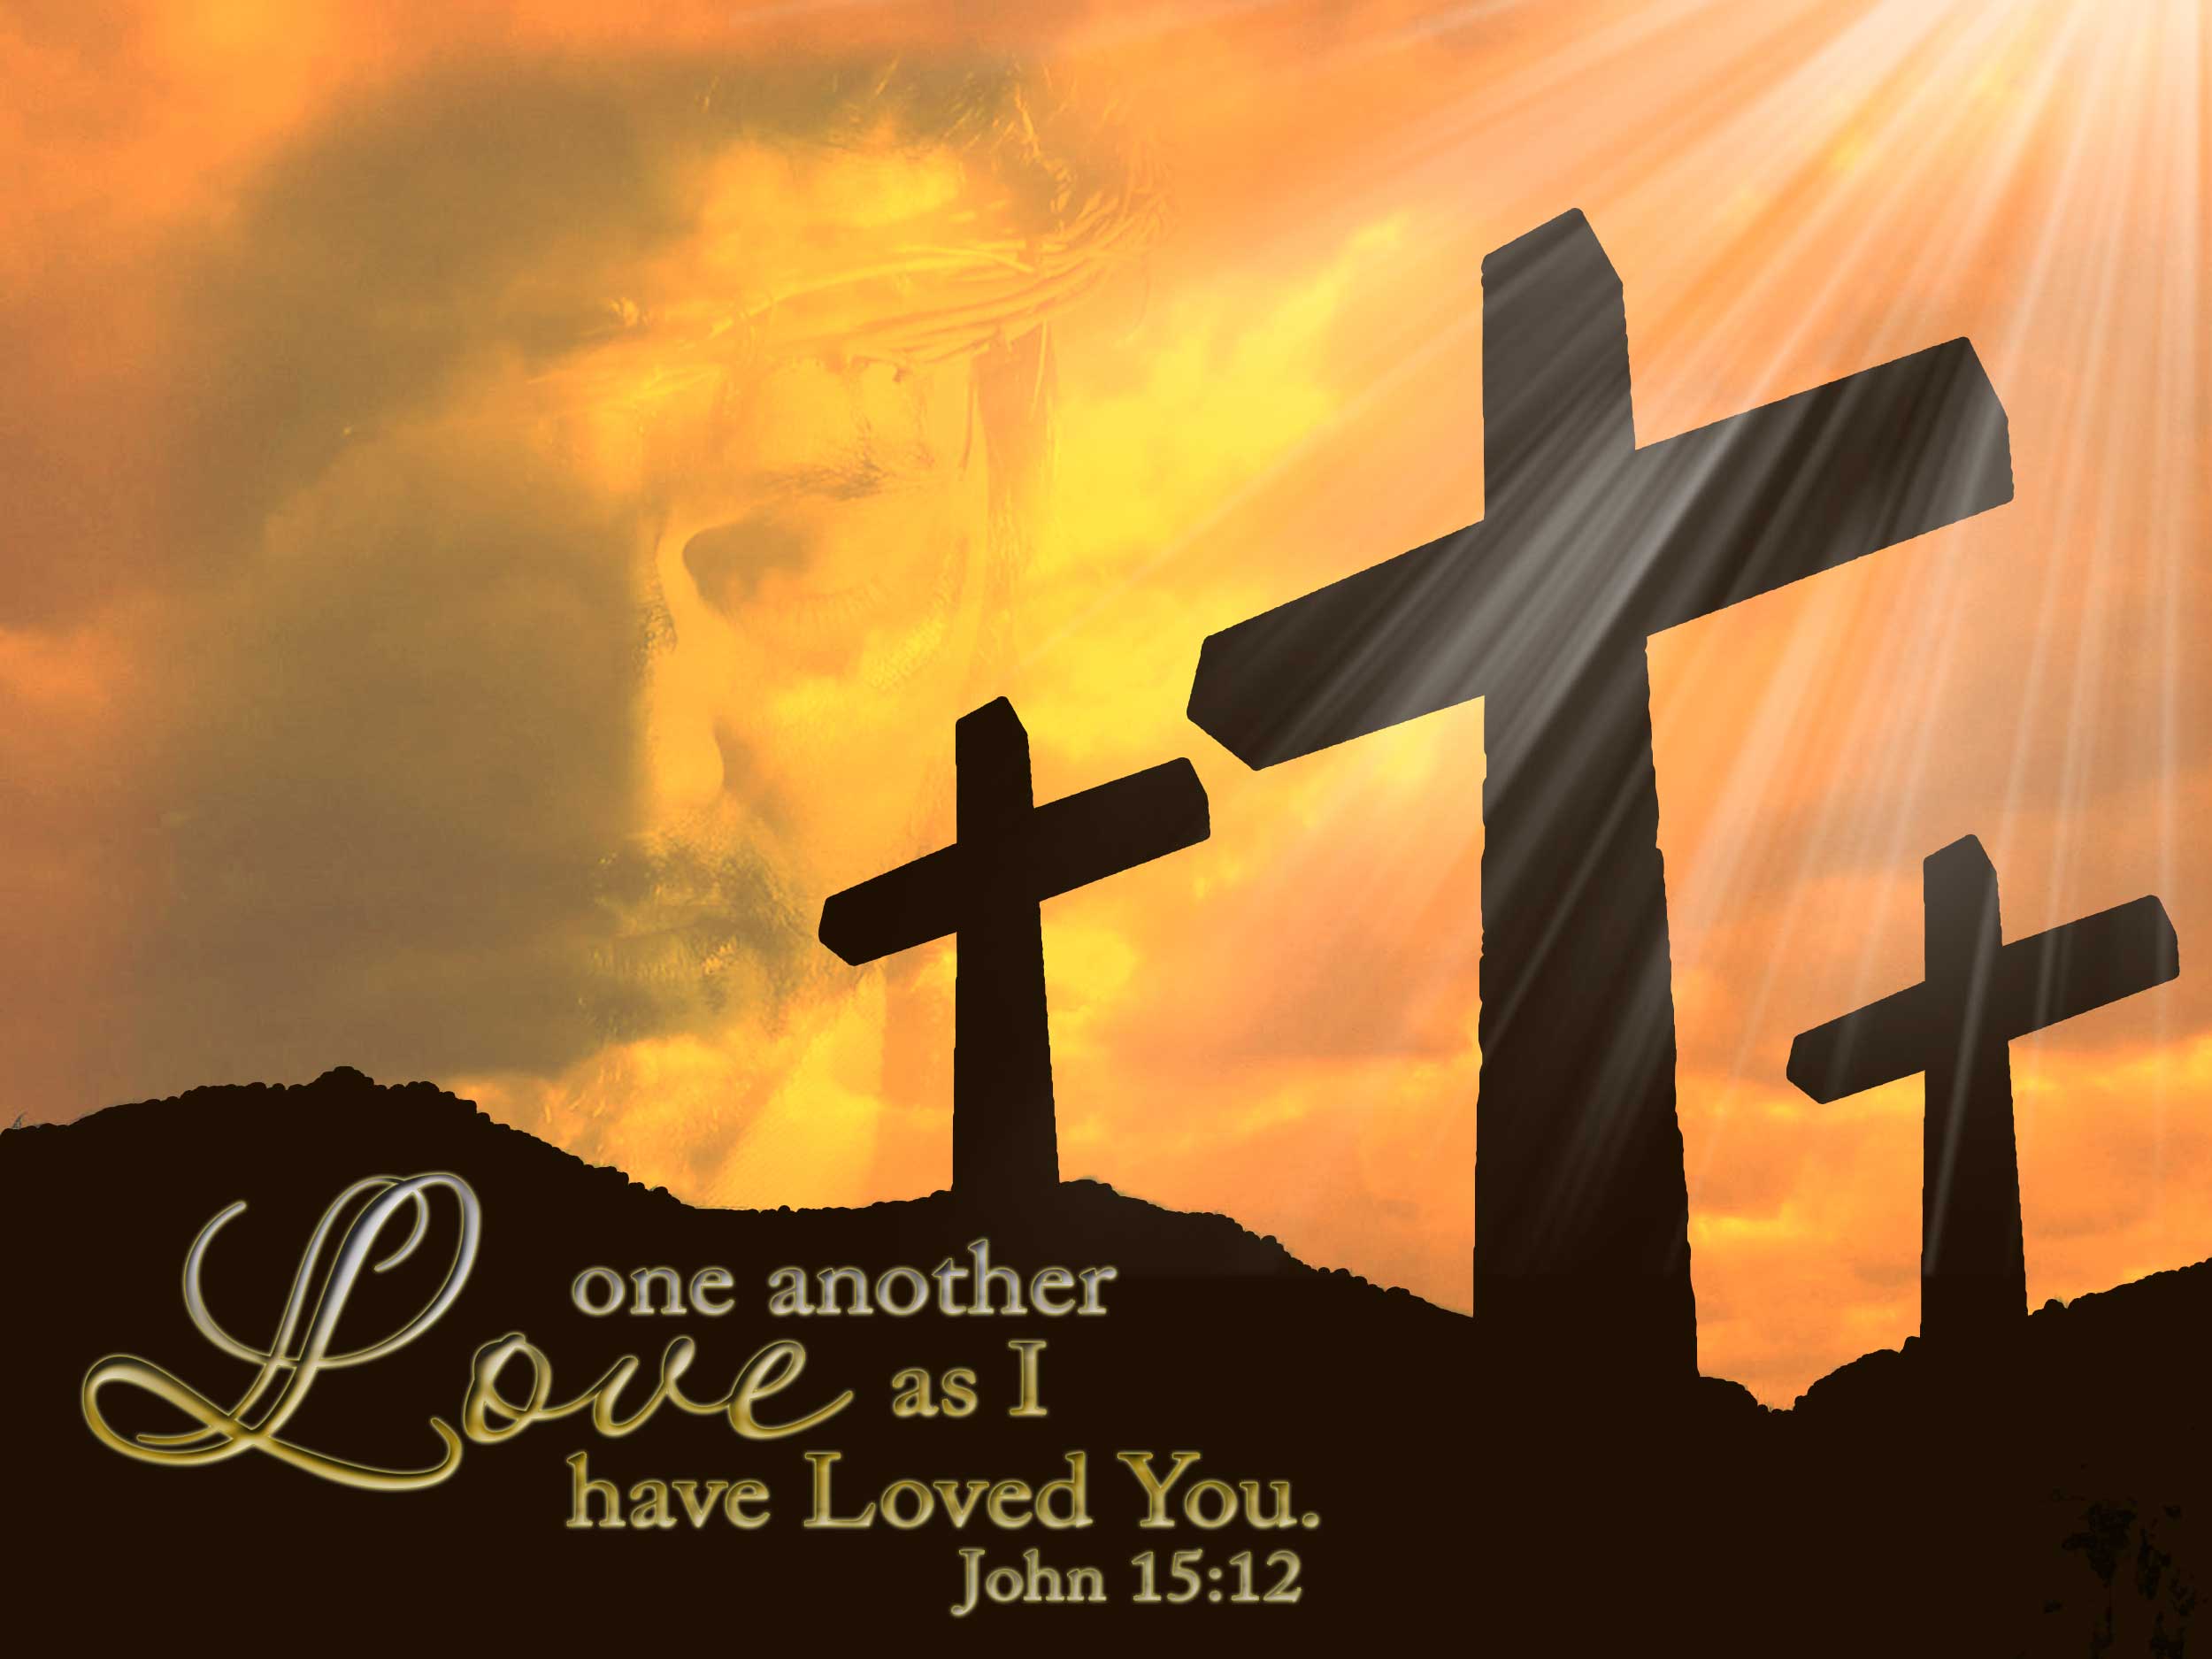  Love one another Wallpaper Christian Wallpapers and Backgrounds